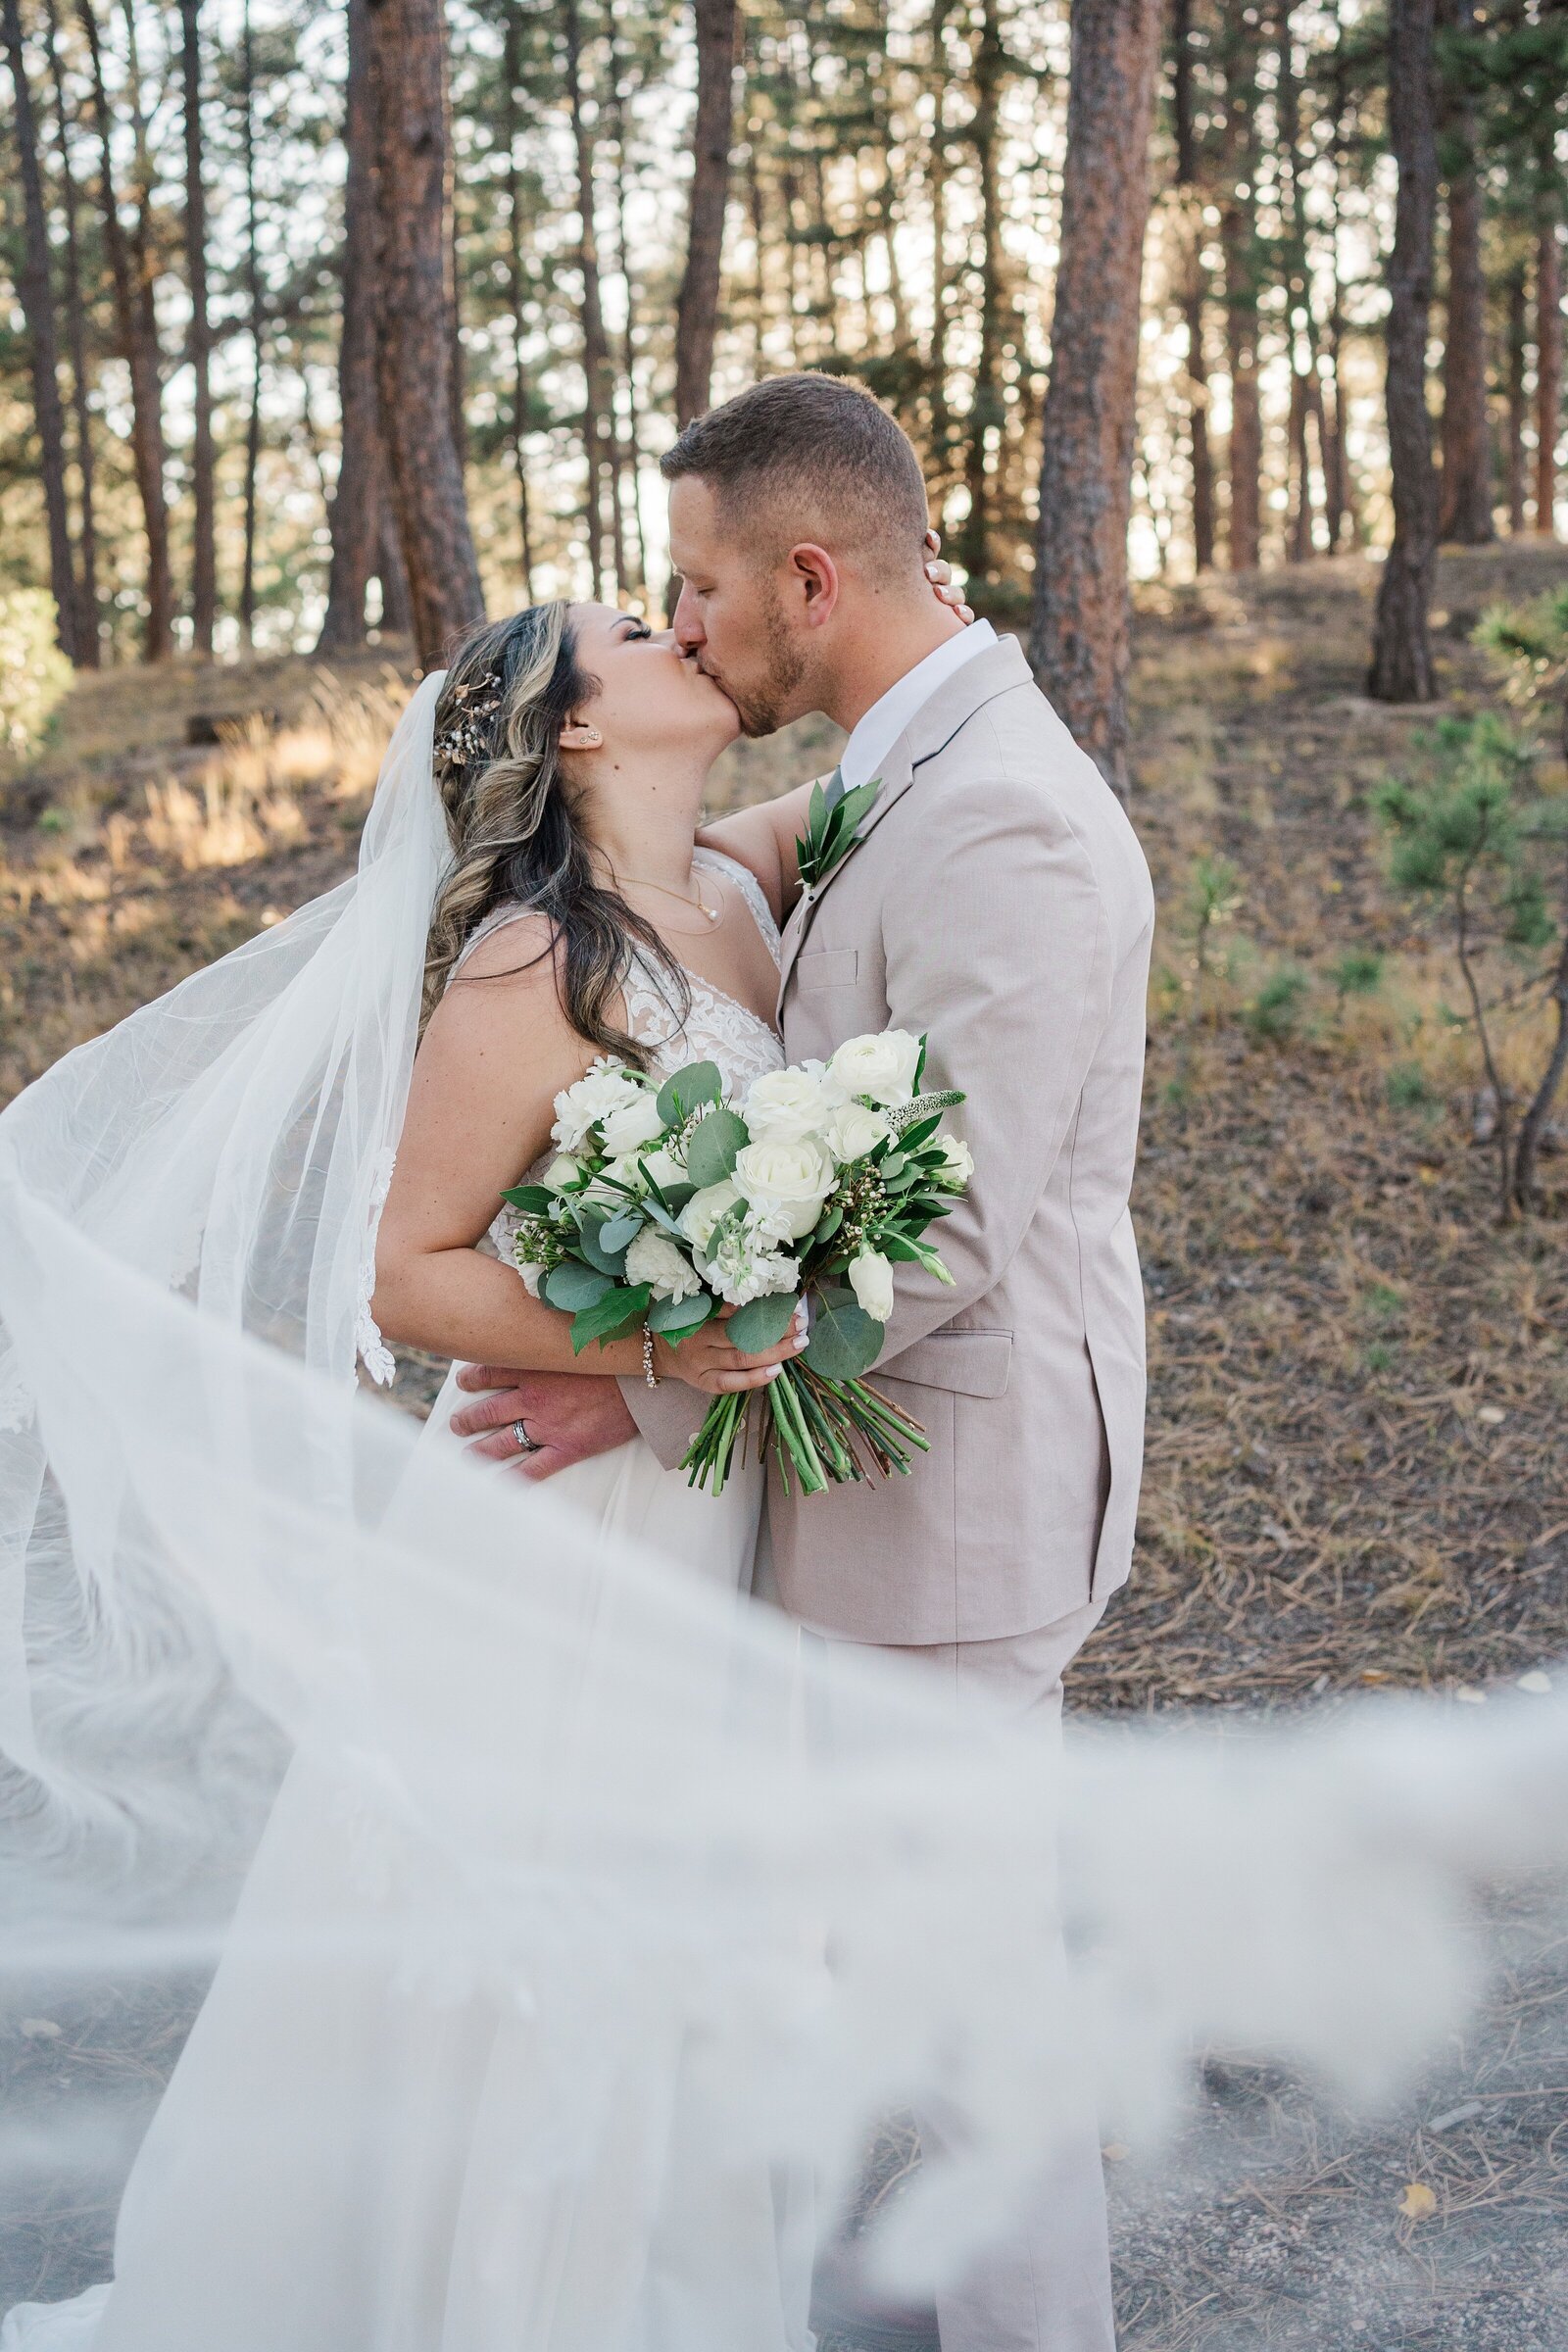 Create a personalized elopement that reflects your unique love story. Samantha Immer works with you to design an elopement that is tailored to your style and preferences.